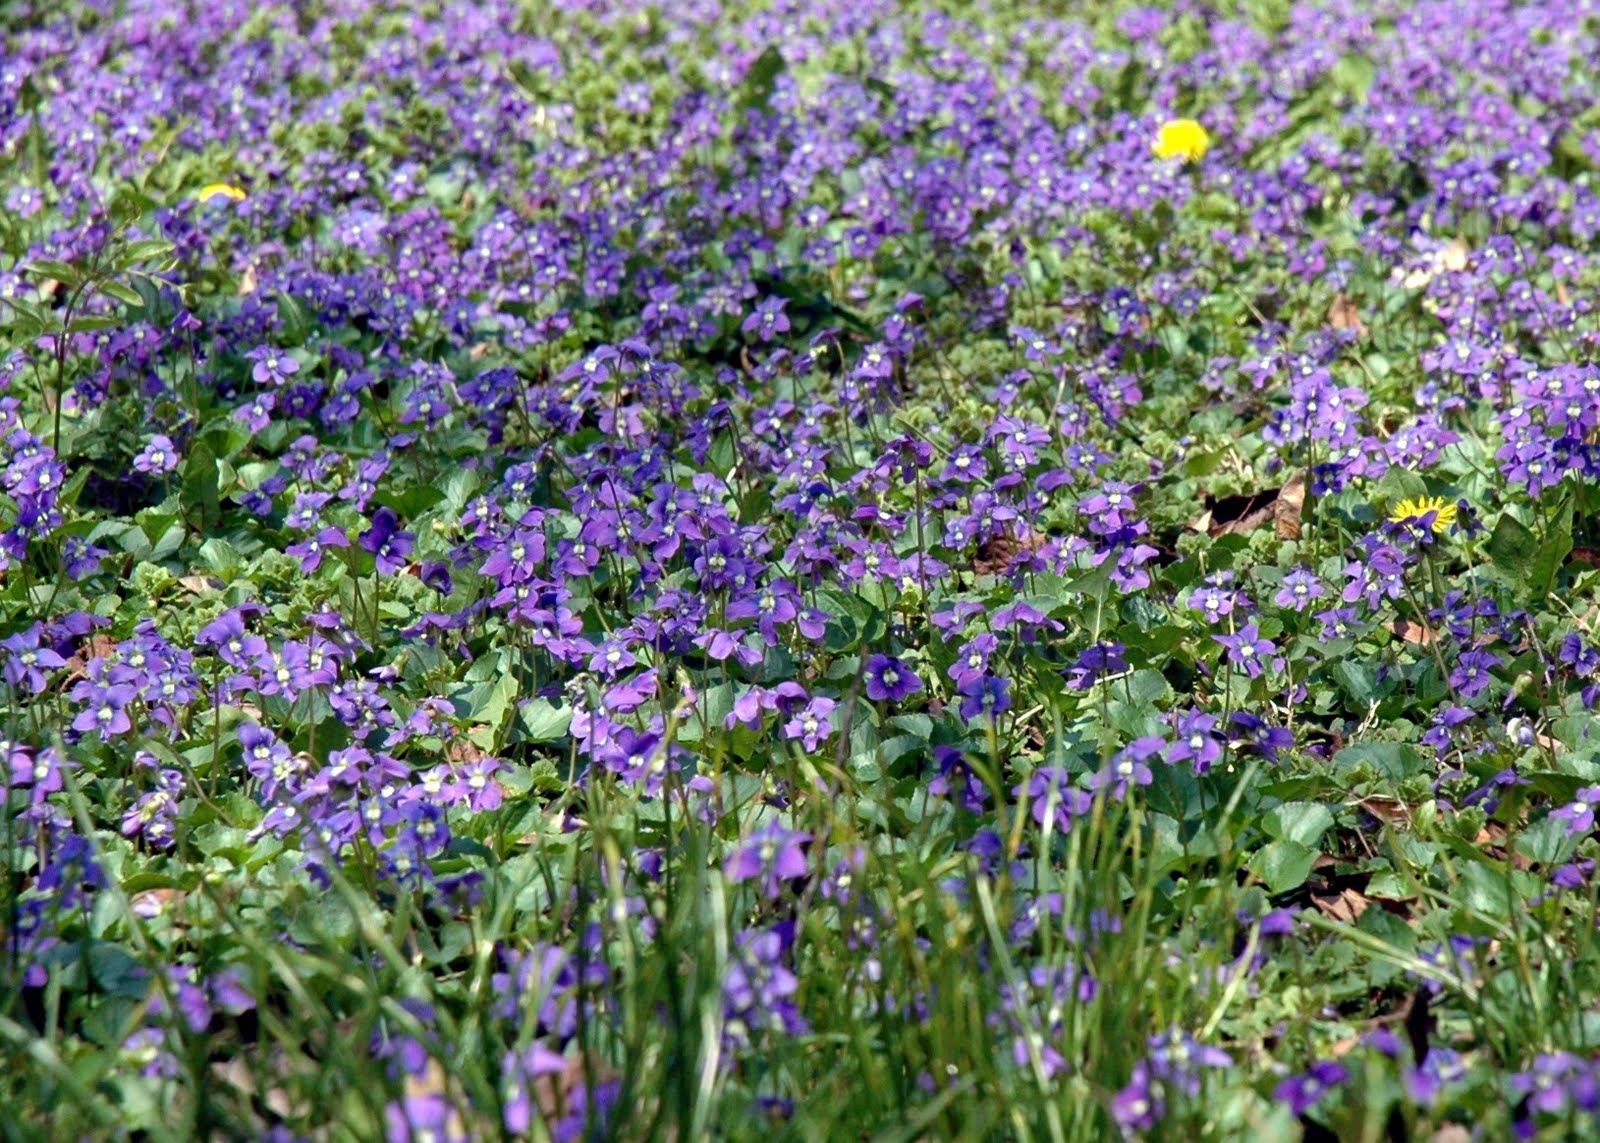 Rosie Barry: Small Purple Flowers In Grass : Common Lawn Weeds and How ...